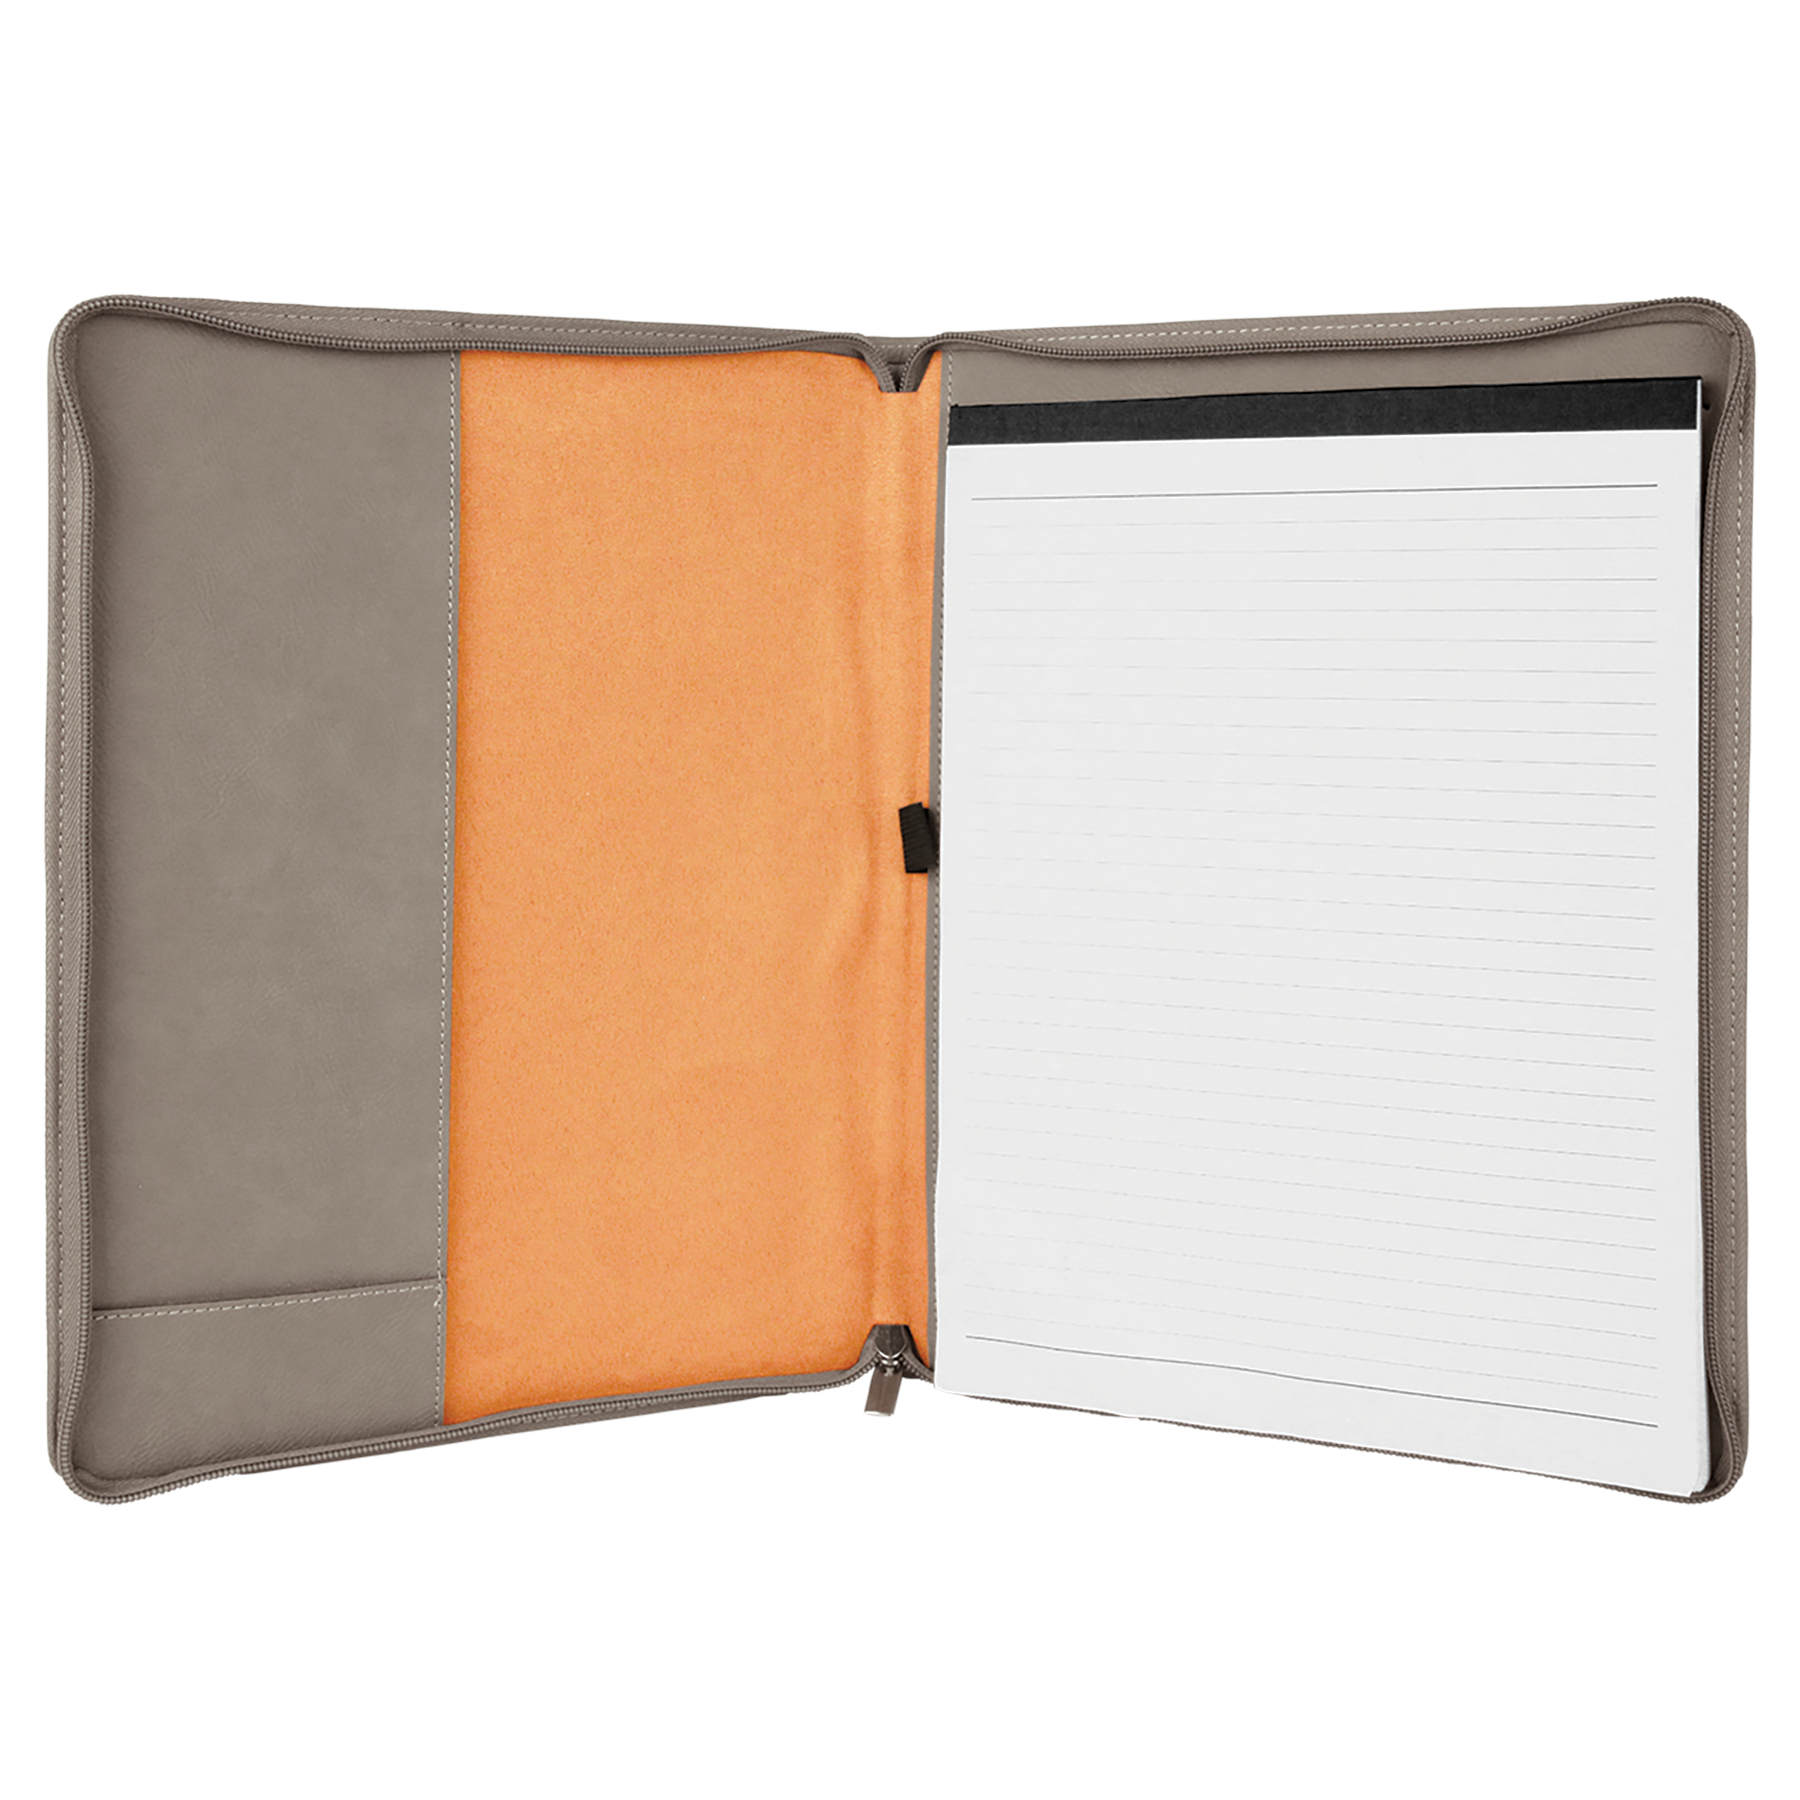 9 1/2" x 12"  Leatherette Portfolio with Notepad and Zipper